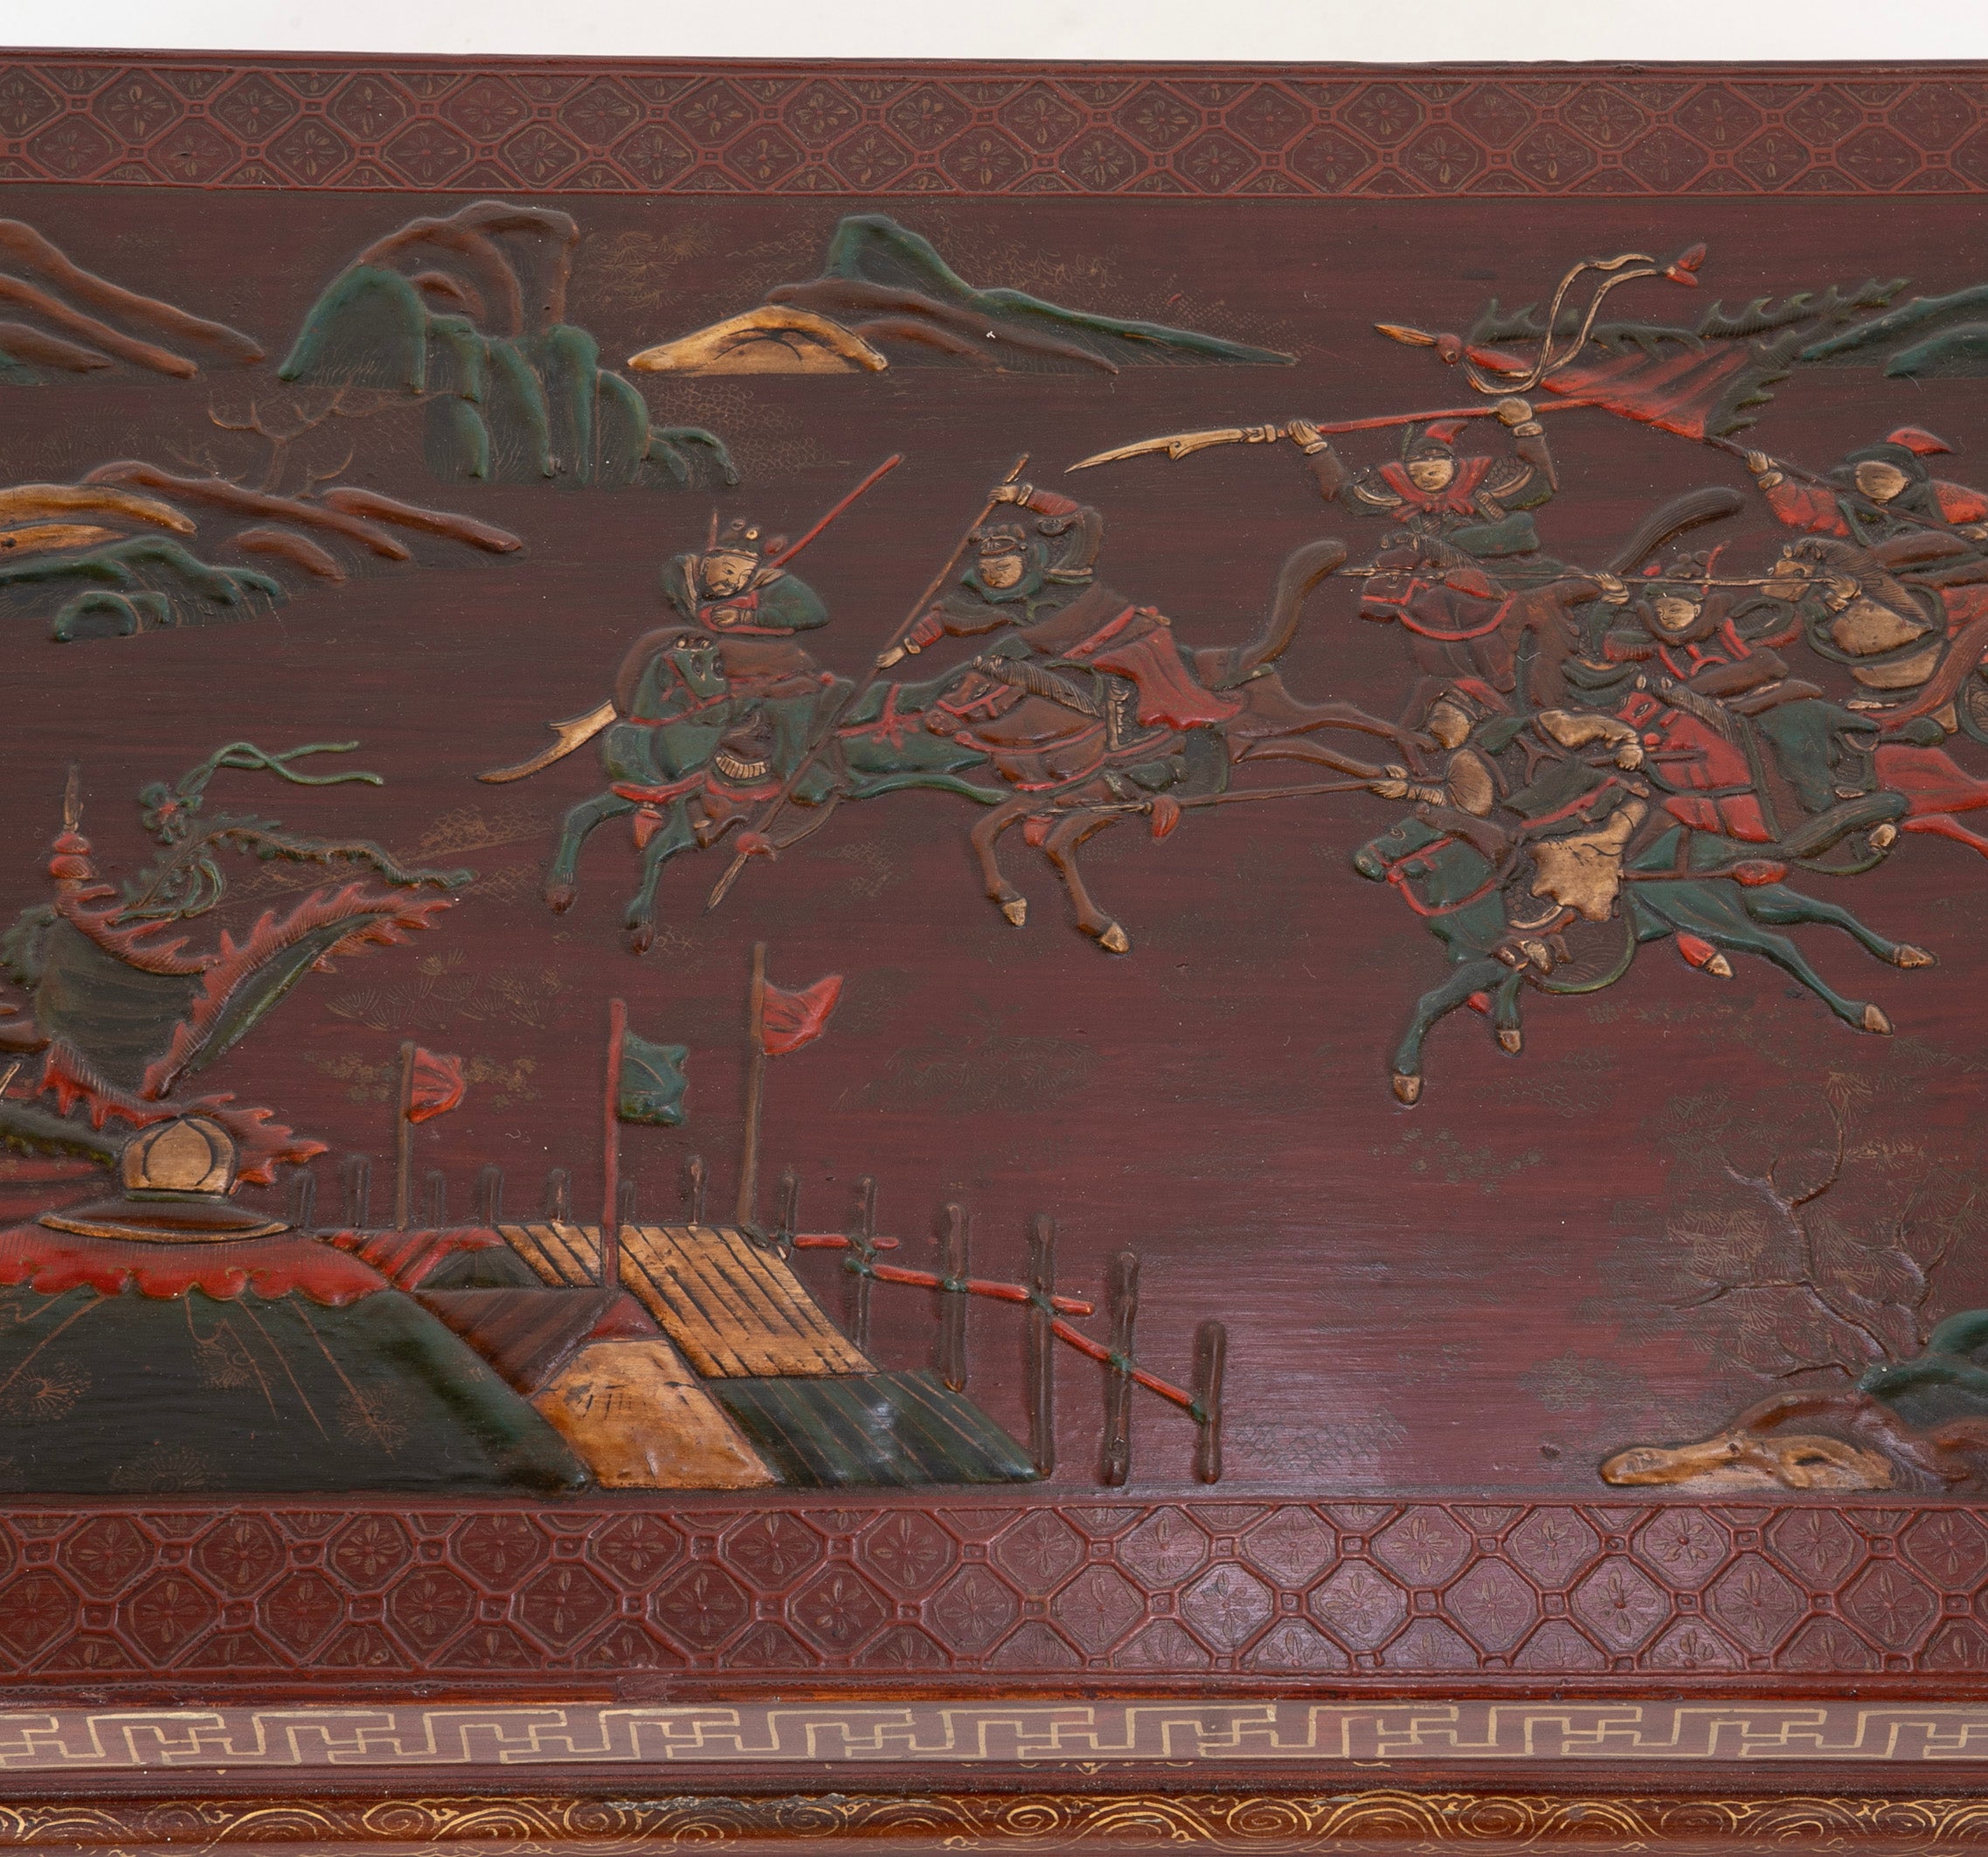 Chinese Lacquered and Decorated Low Table